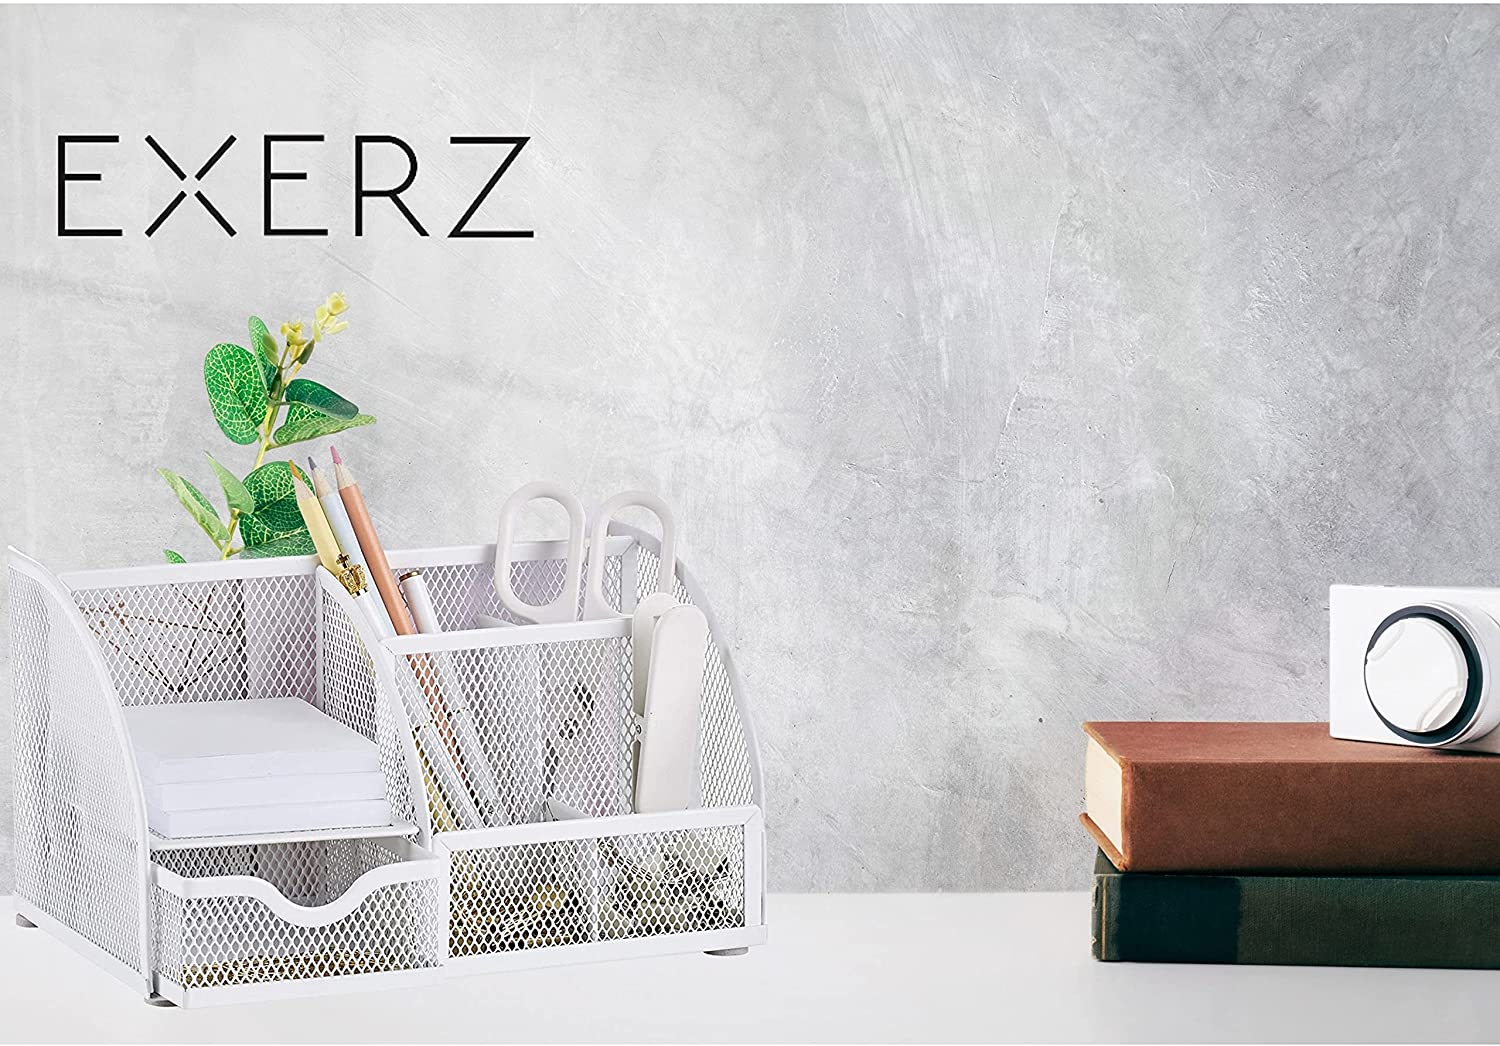 EXERZ Desk Organiser with 7 Compartments -Mesh Desk Tidy Caddy - White